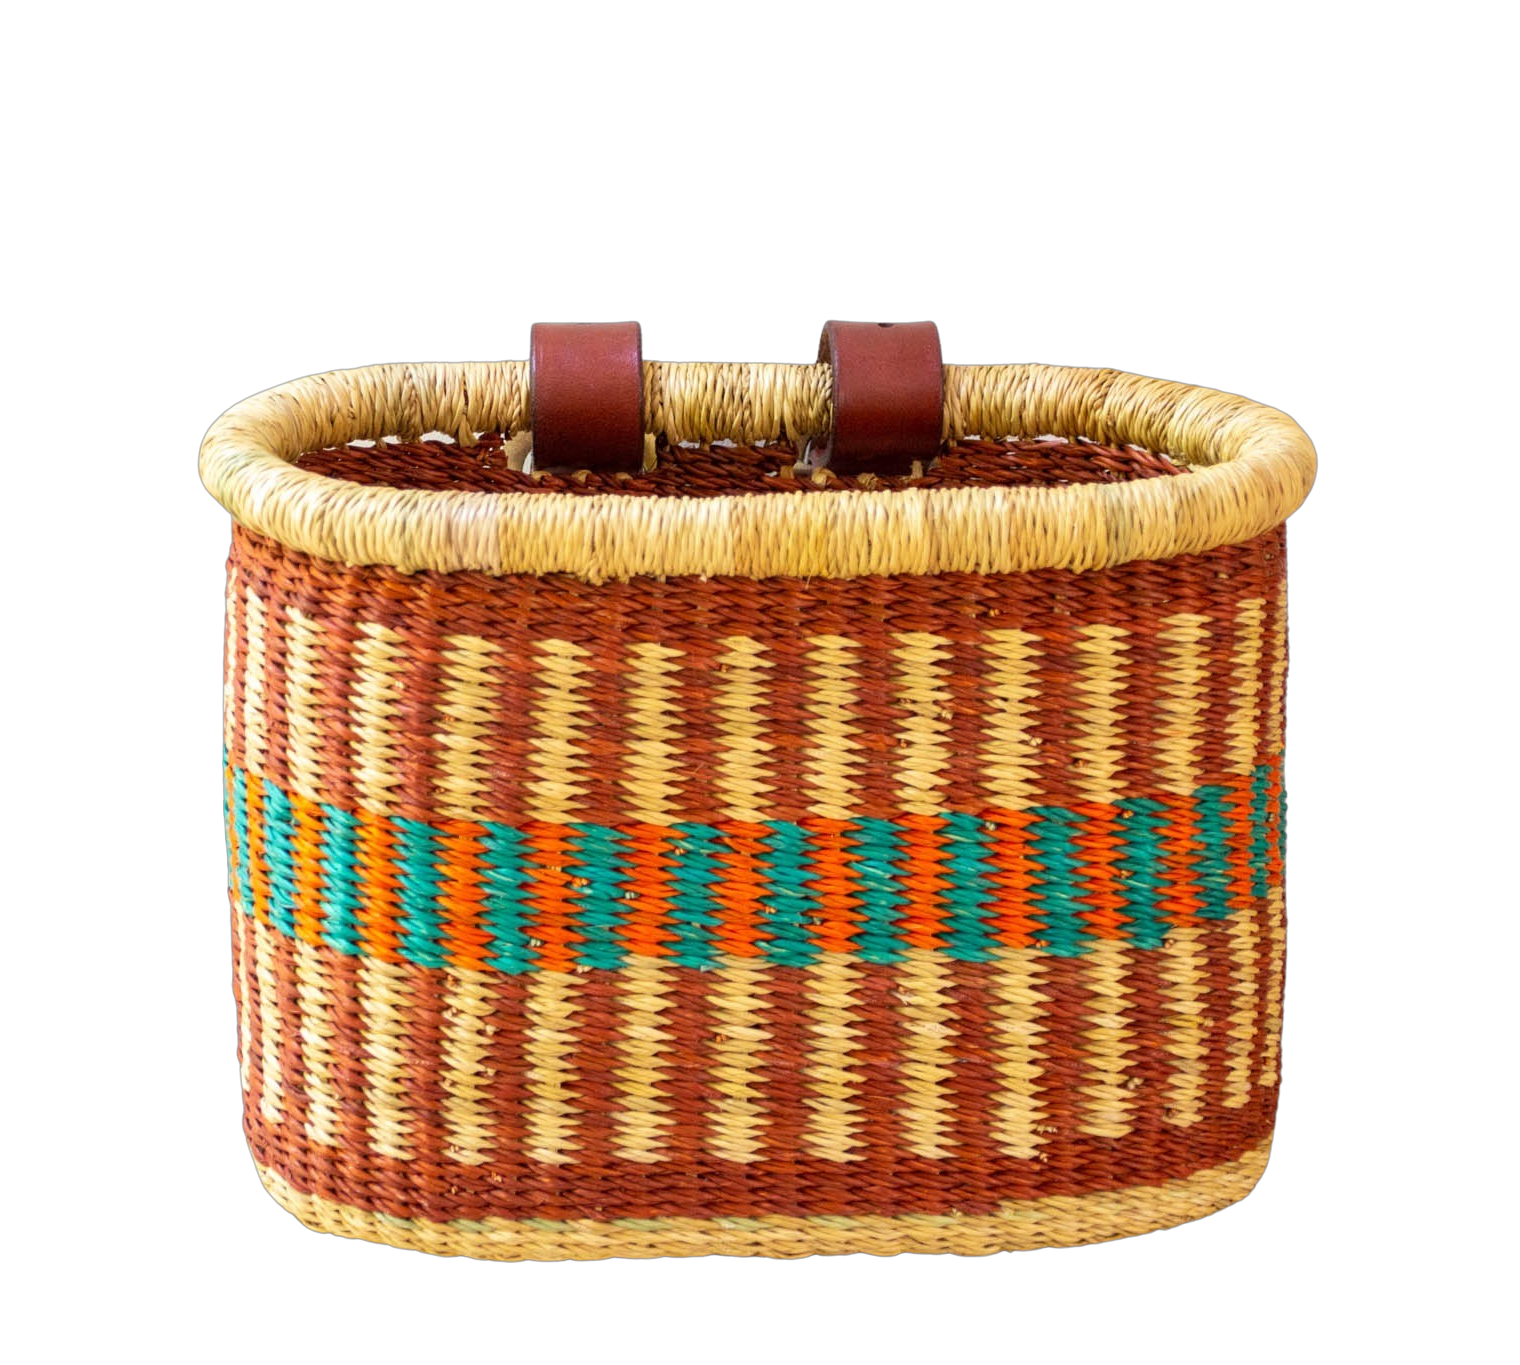 Brik-red and turquoise bicycle basket